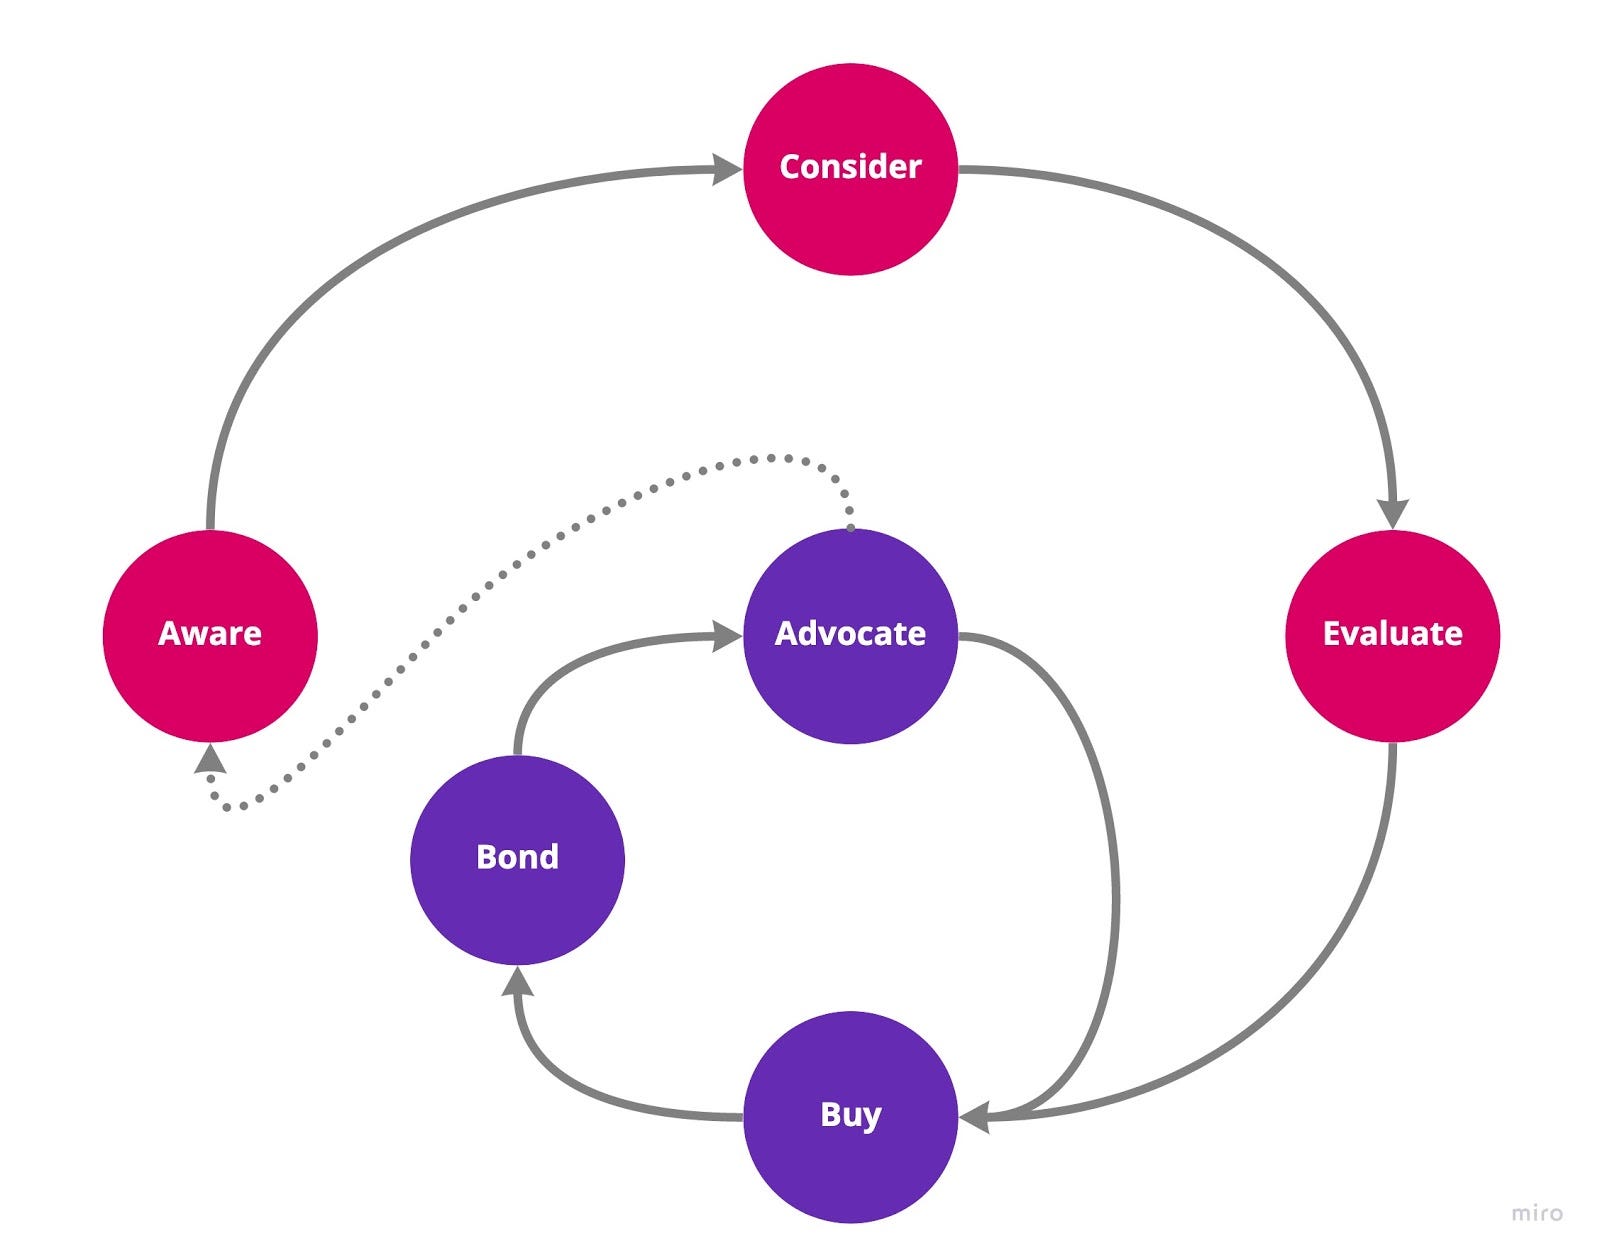 The image shows a cycle diagram, with the following stages: aware, consider, evaluate, buy, bond, advocate. There’s a line from ‘advocate’ back to ‘aware’.